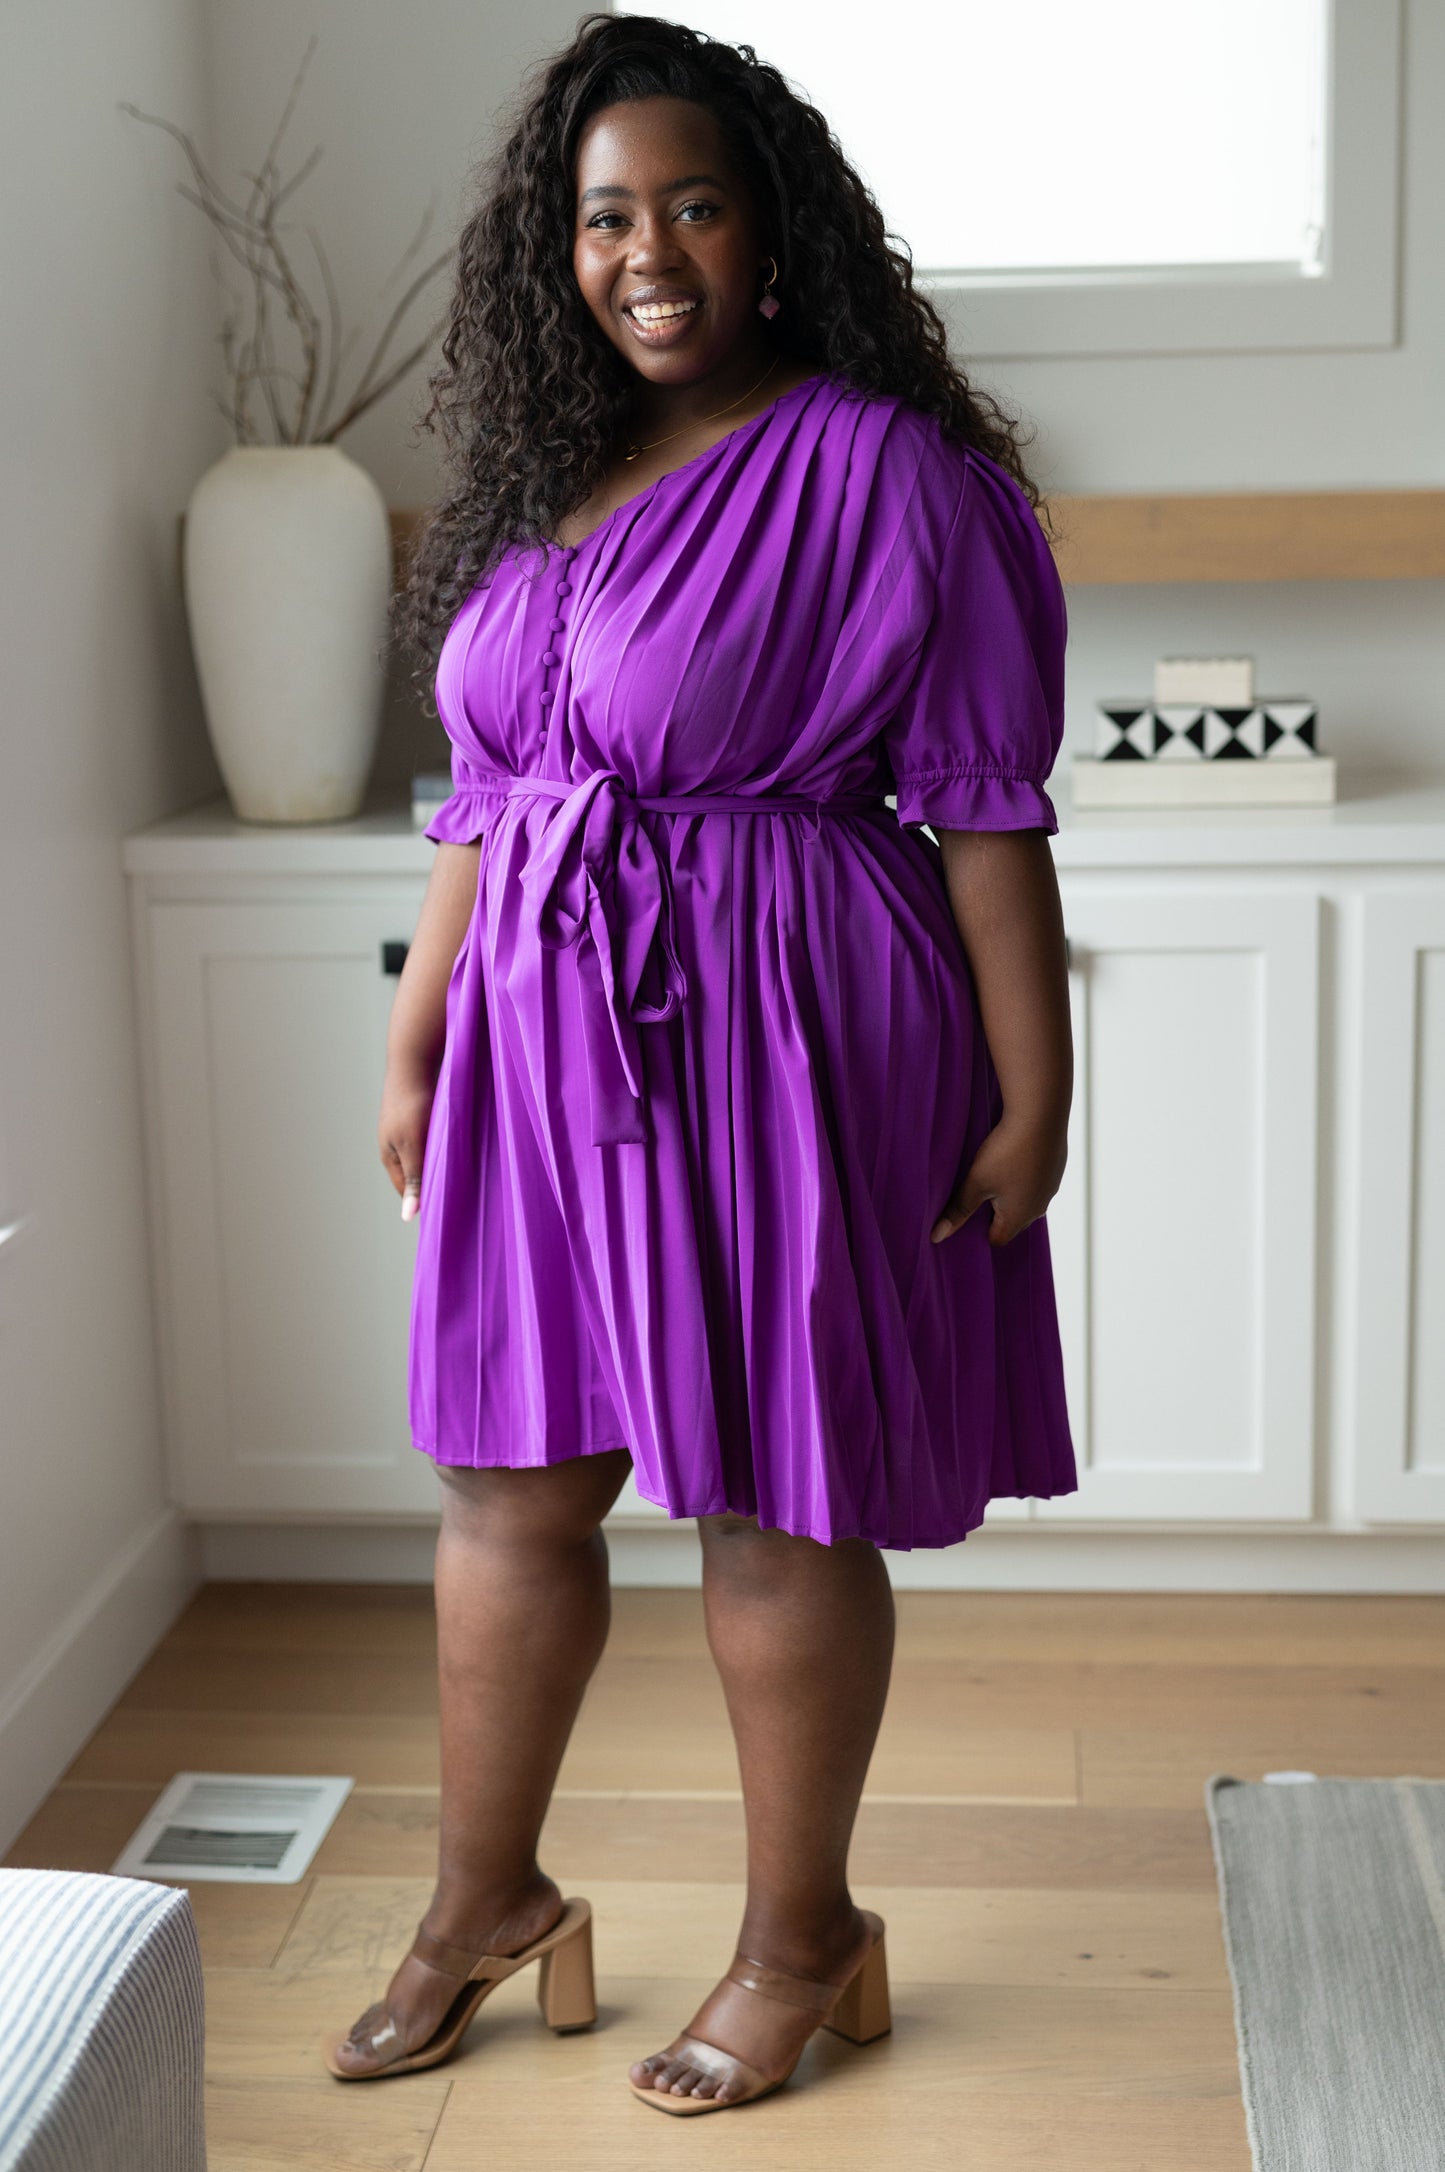 Hold And Squeeze Me Pleated Dress in Grape